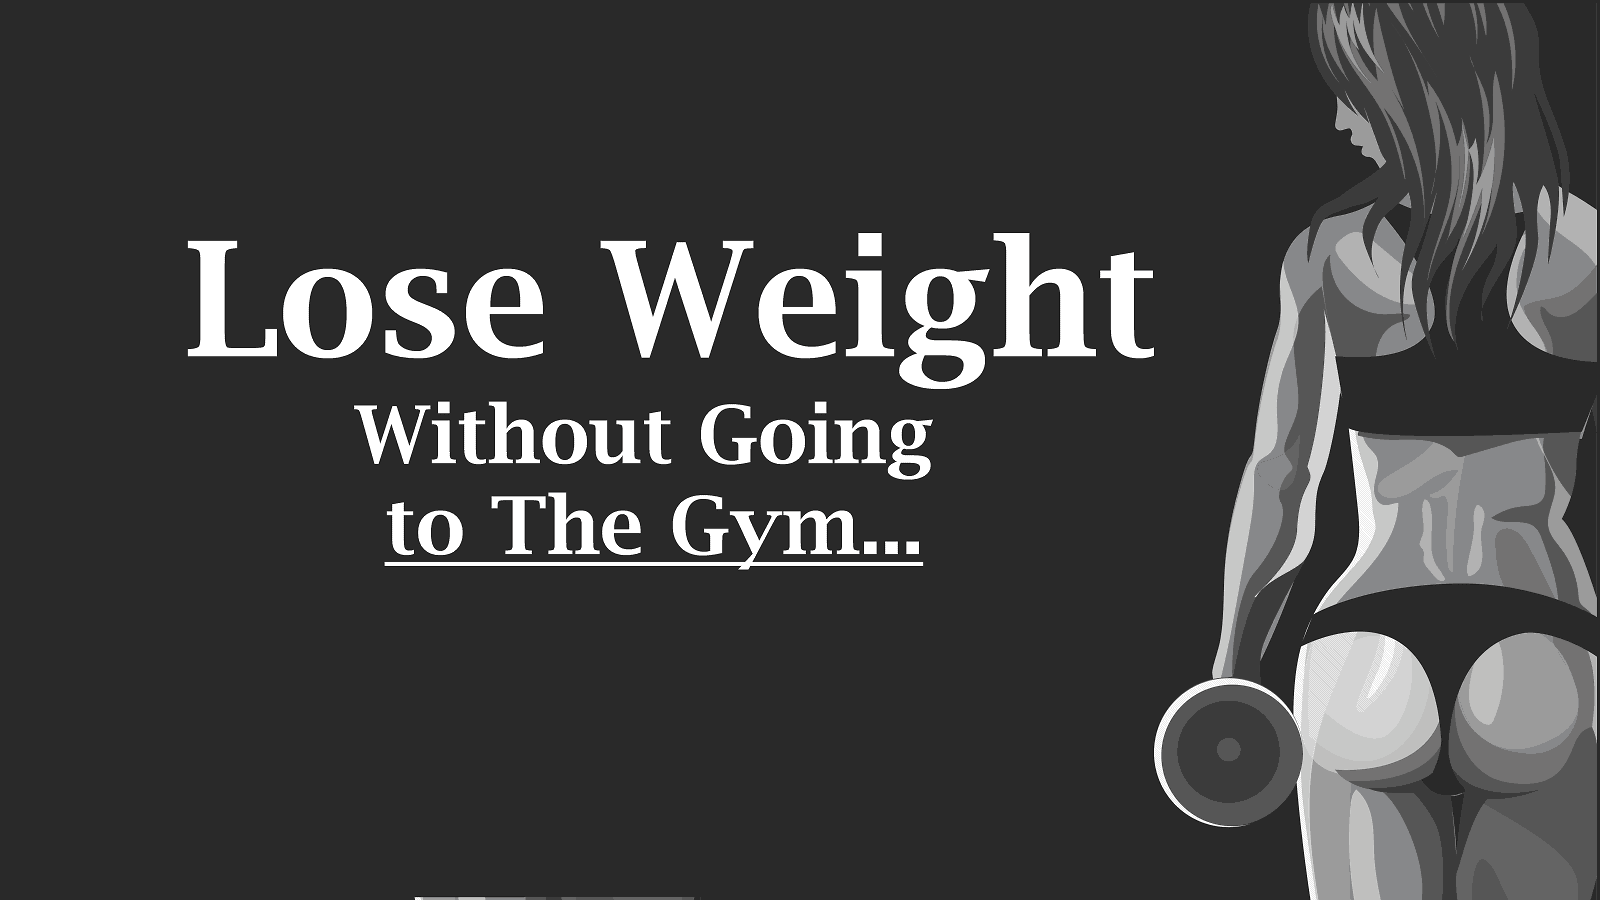 10 Ways to Lose Weight Without Going to The Gym